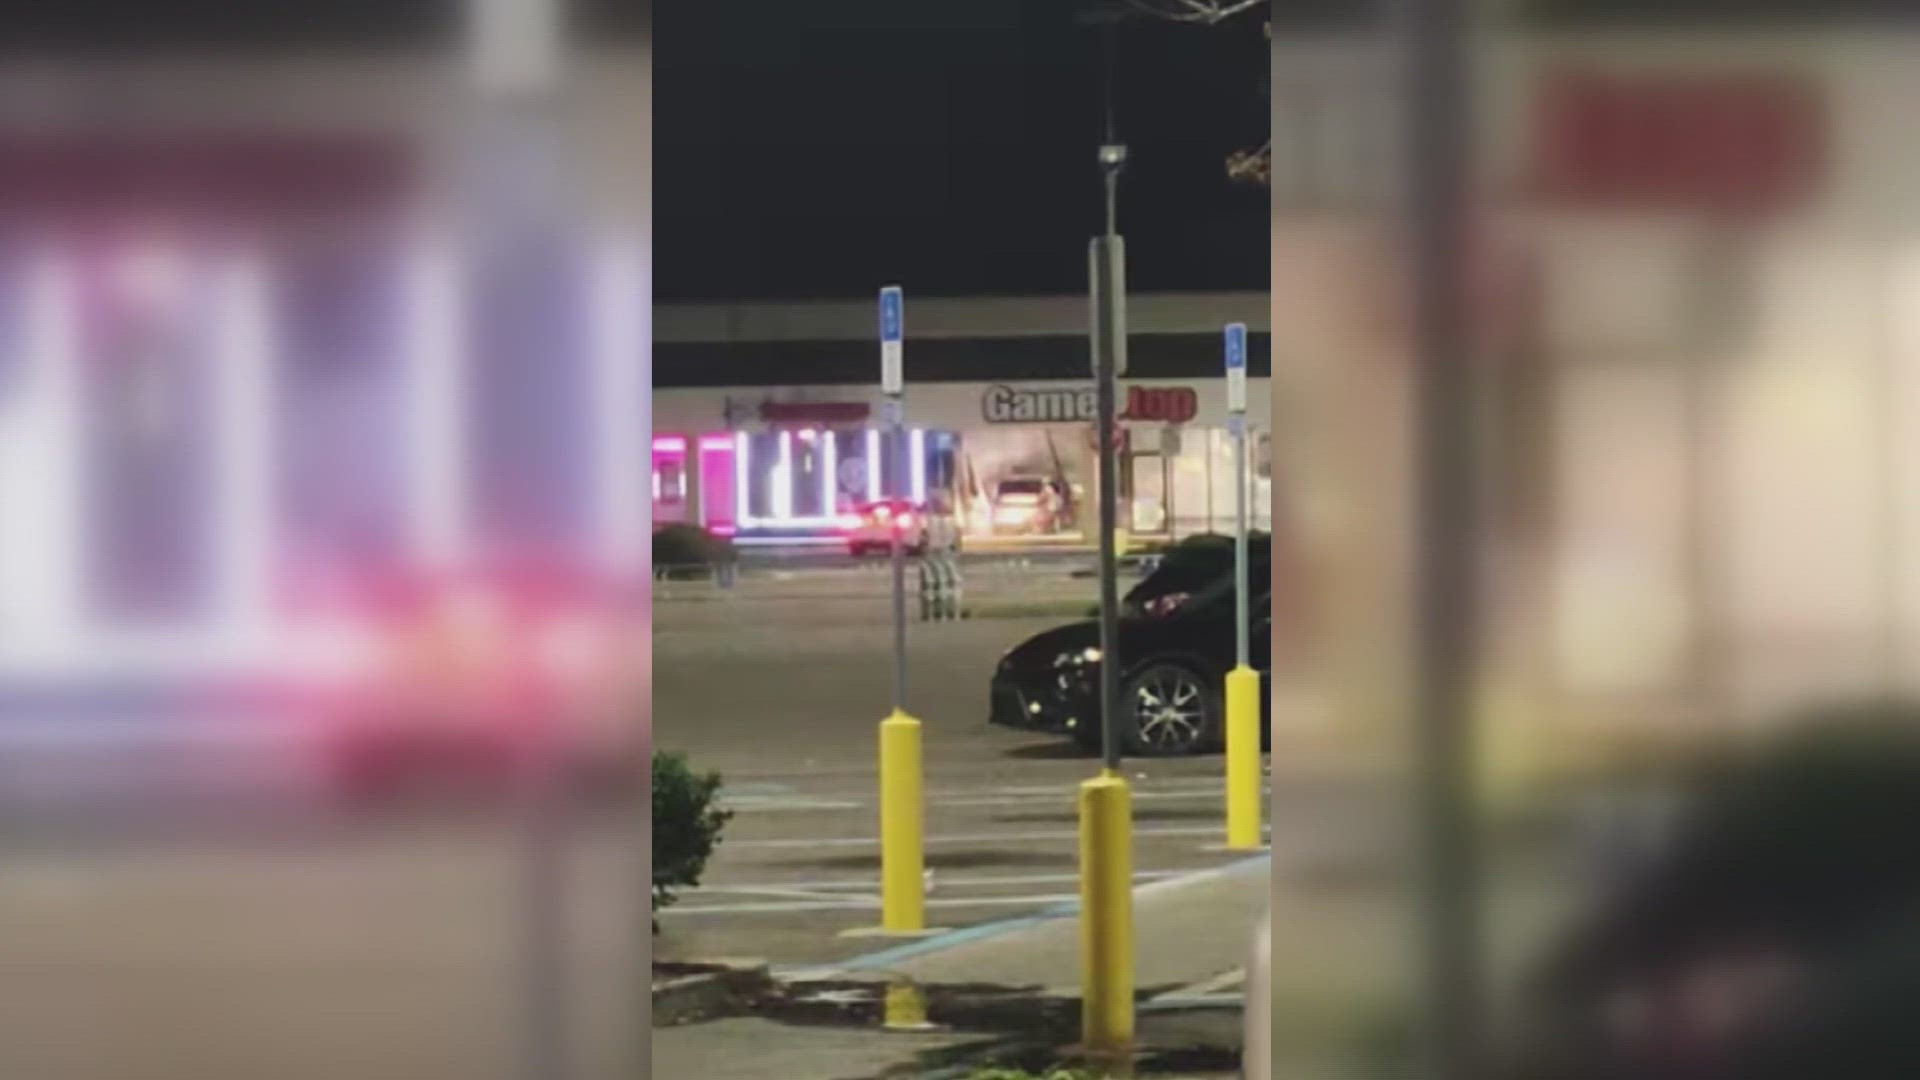 One video posted to social media showed a white car driving into the GameStop.